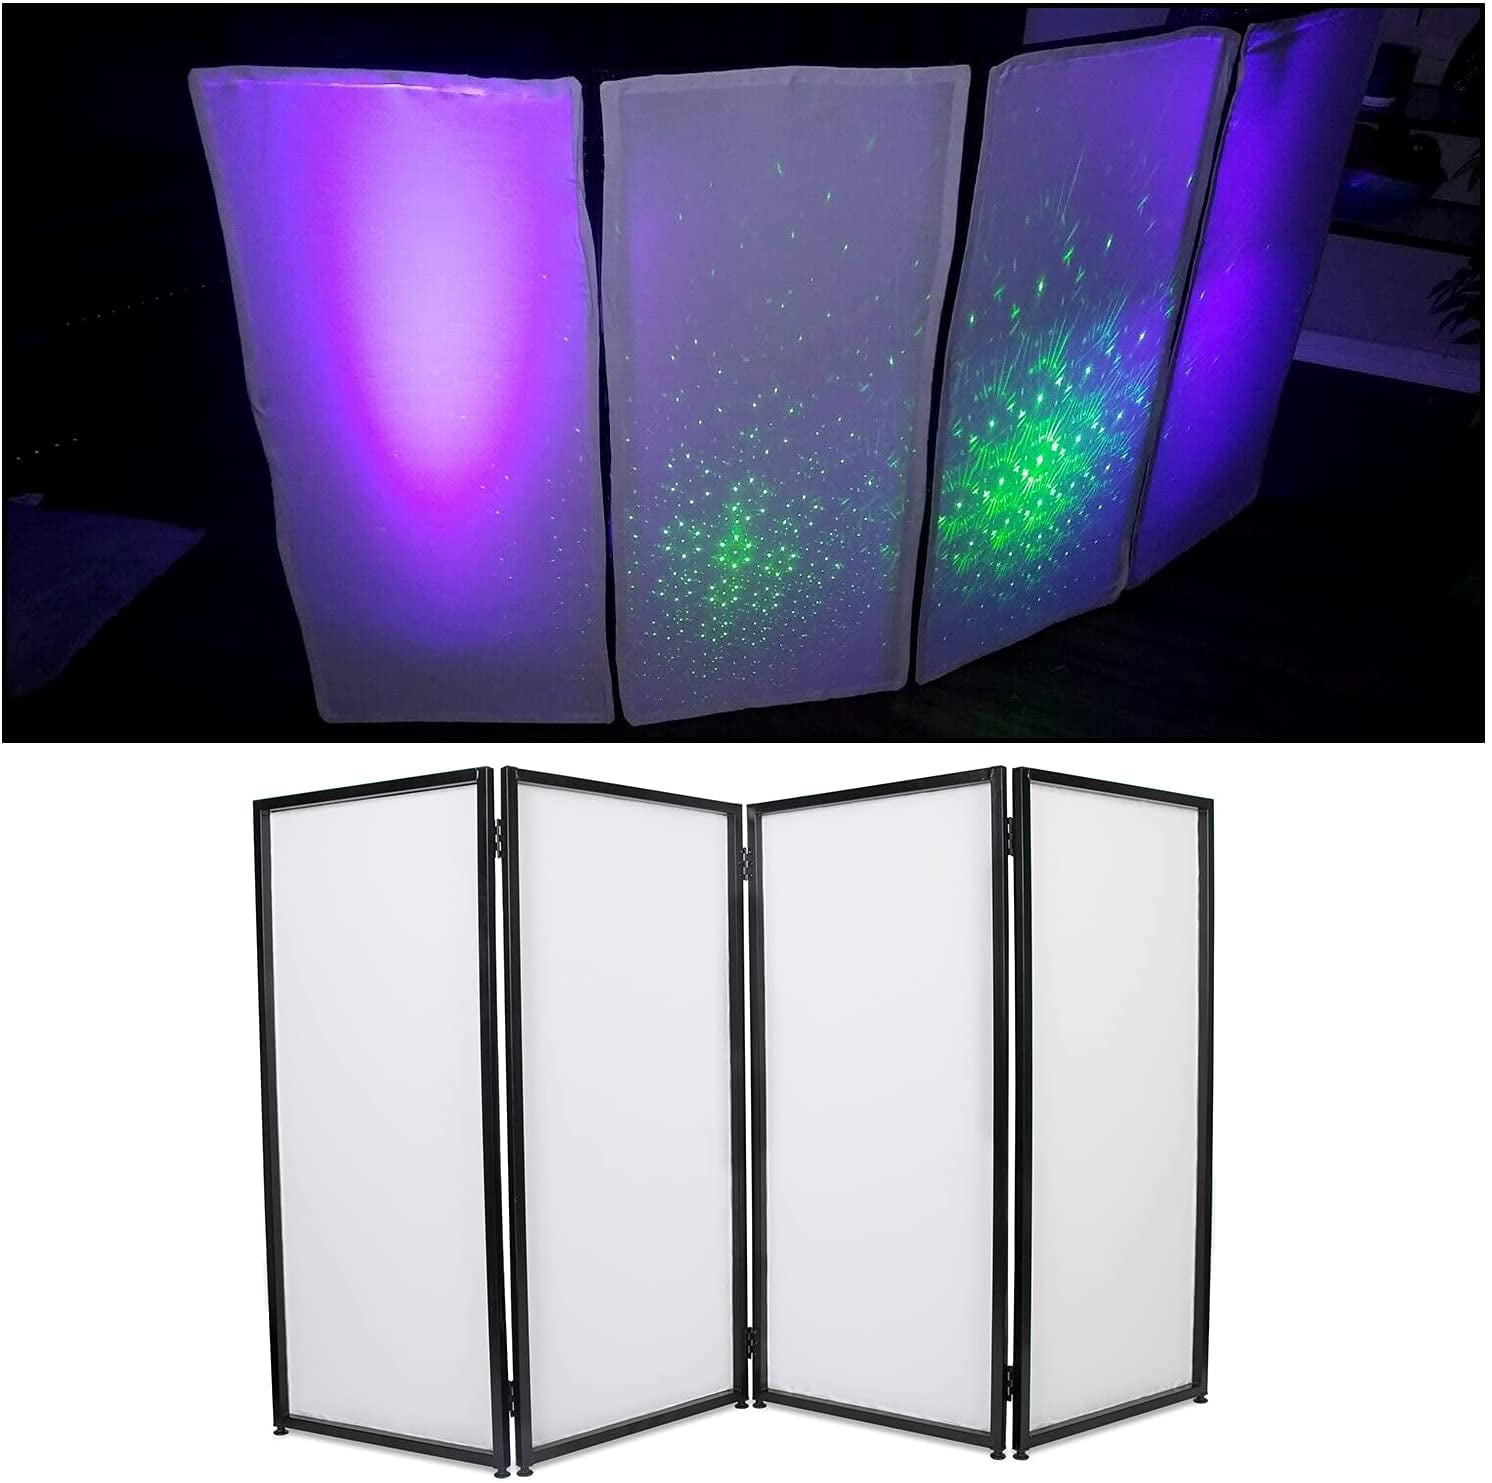 Sardoxx DJ Booth DJ Facade Portable DJ Event Booth Foldable Cover Screen Metal Frame Booth Front Board Video Light Projector Display Scrim Panel w/Travel Bag Black White Scrims 